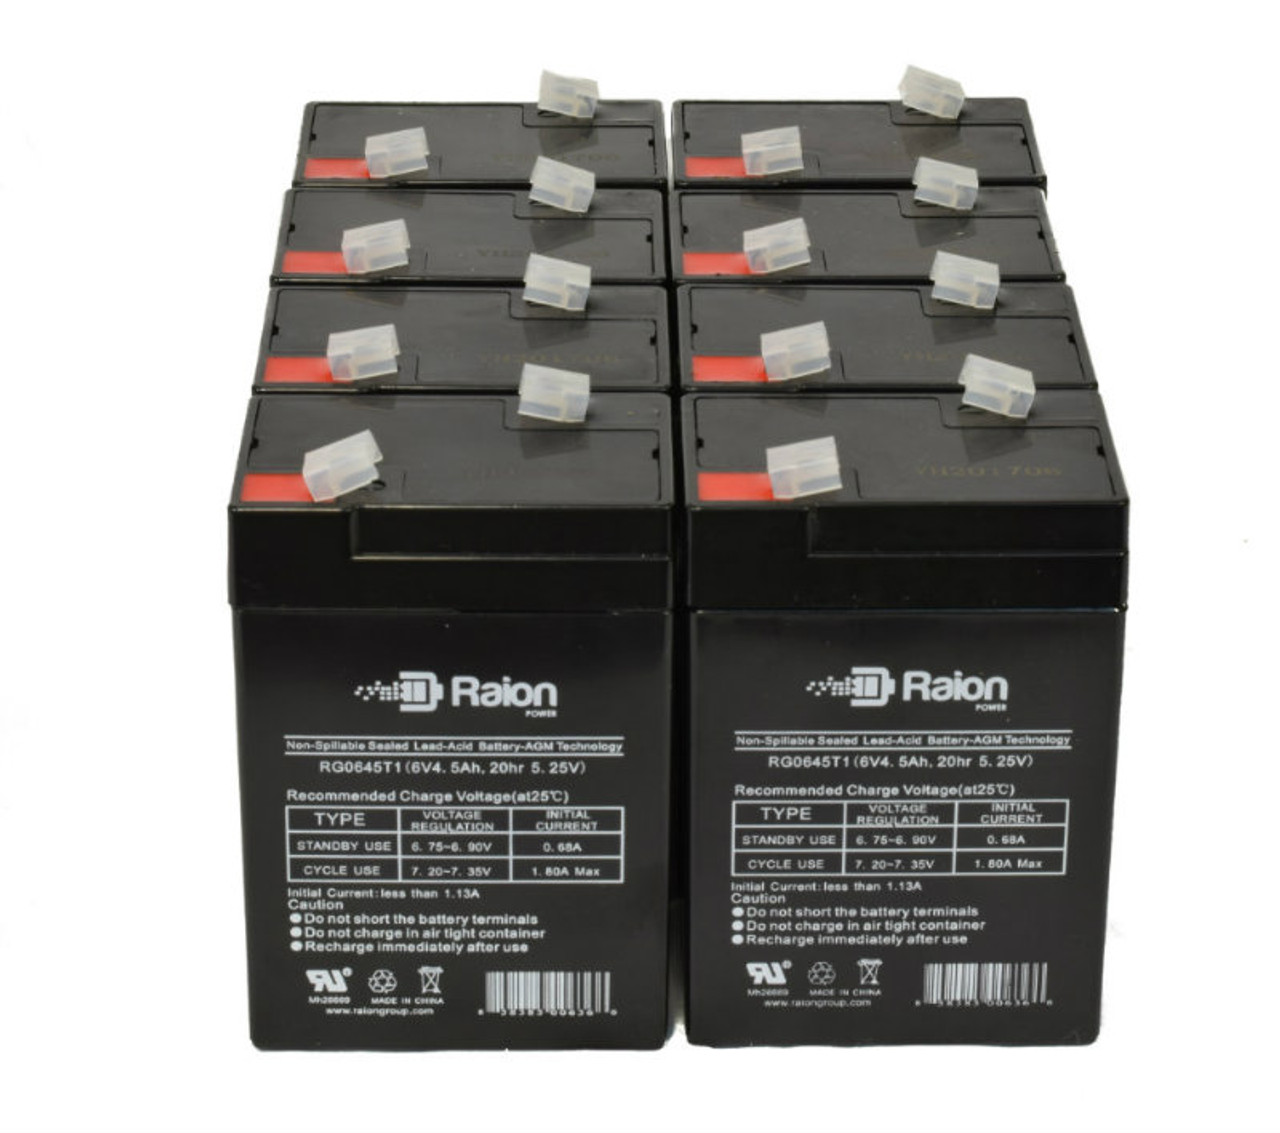 Raion Power 6 Volt 4.5Ah RG0645T1 Replacement Battery for POWERGOR SB6-5 - 8 Pack